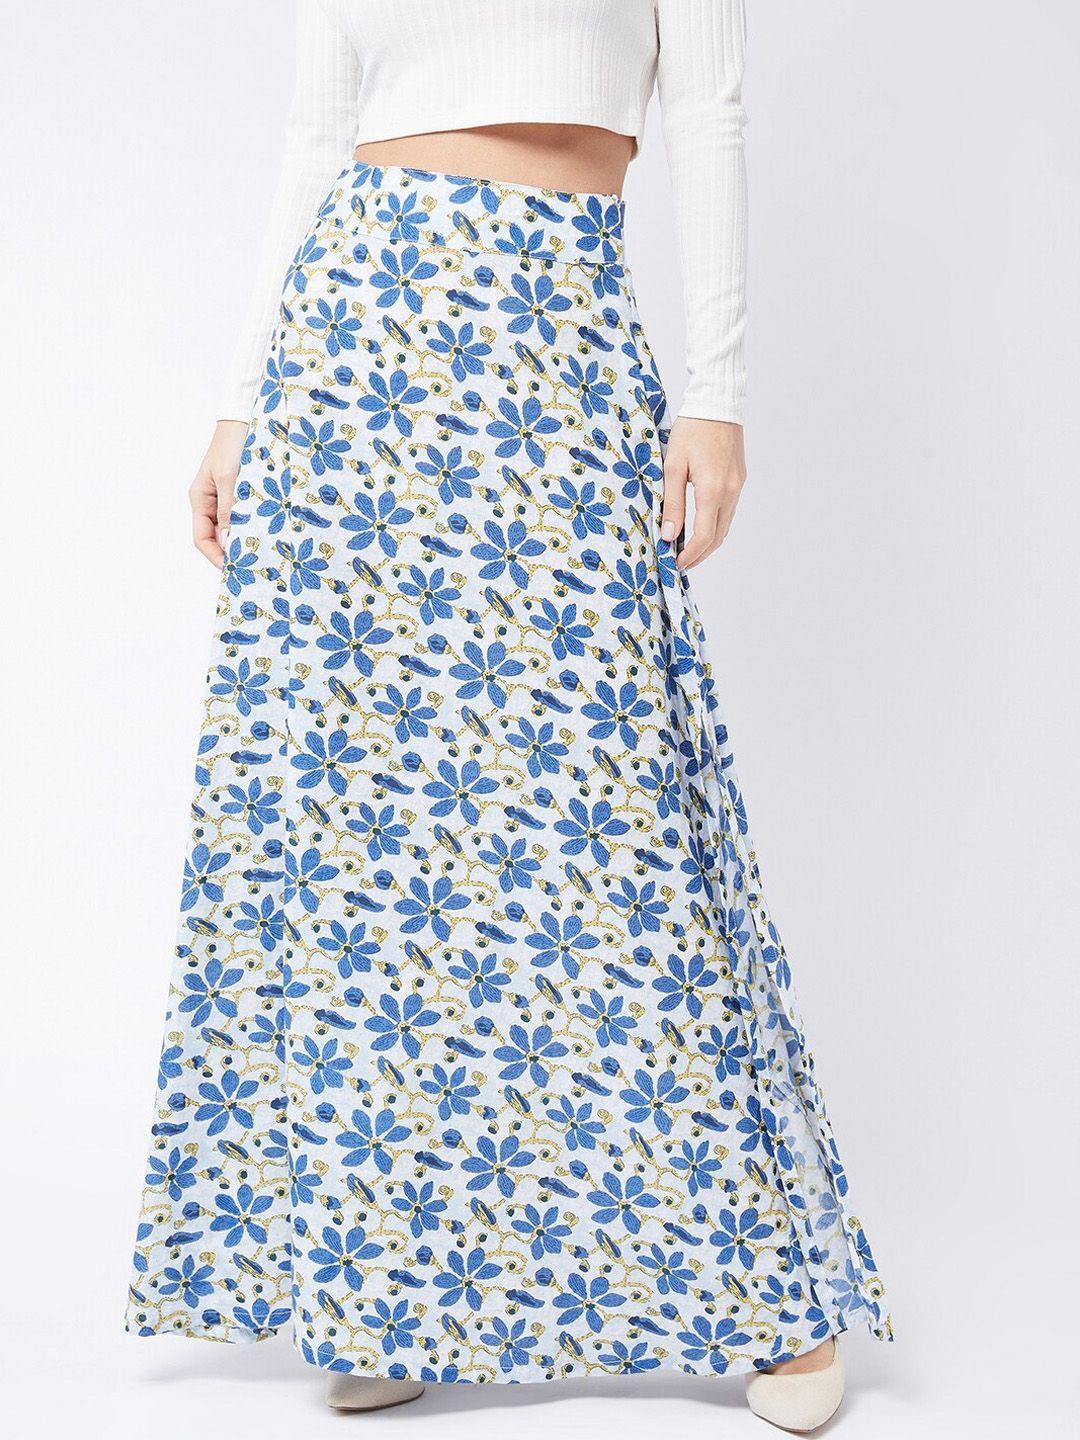 inweave women white & blue floral printed pure cotton a-line maxi skirt